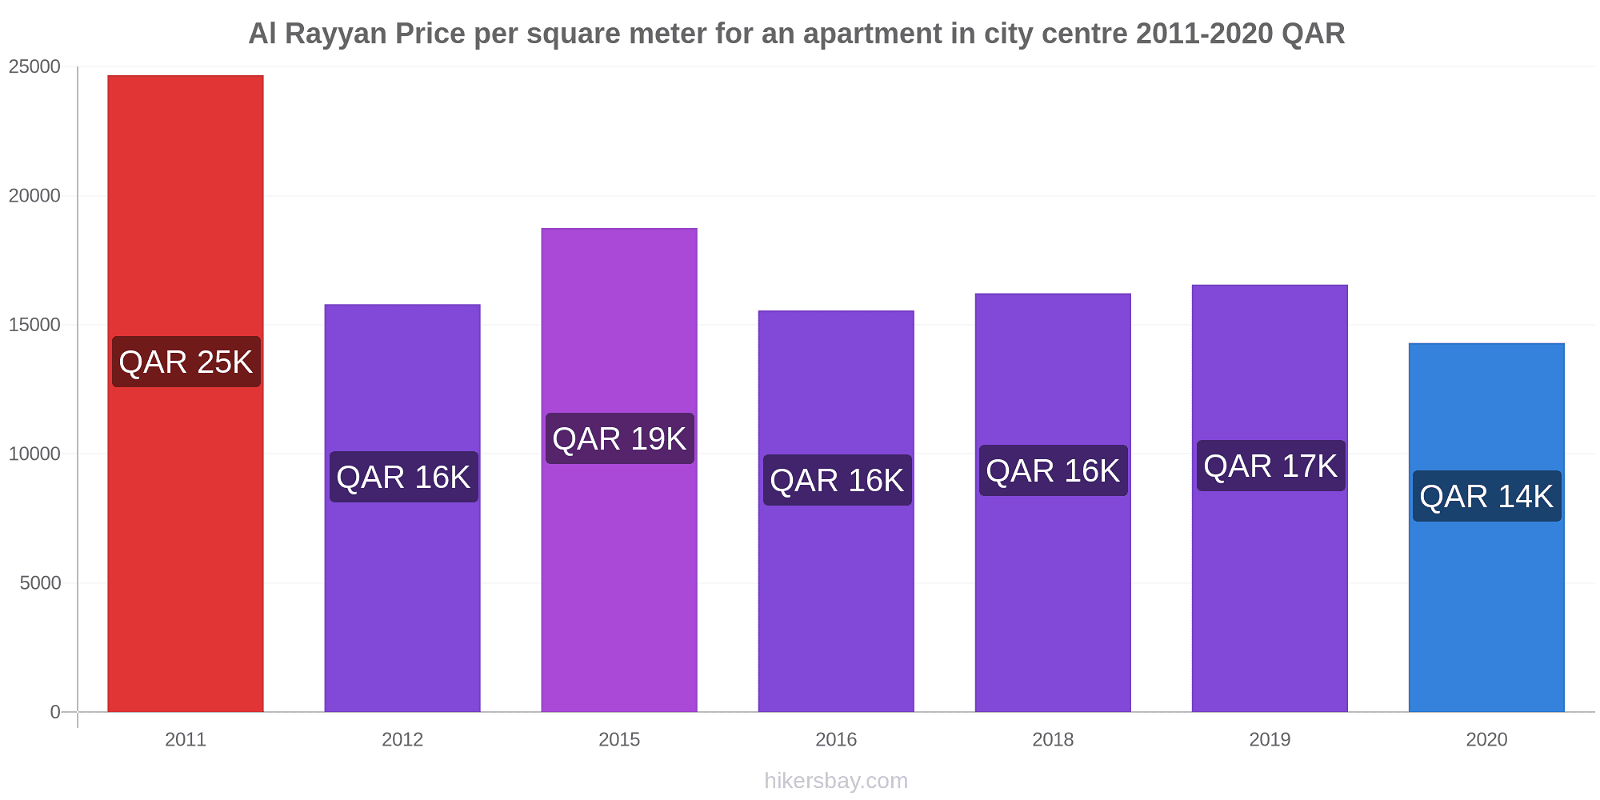 Al Rayyan price changes Price per square meter for an apartment in city centre hikersbay.com